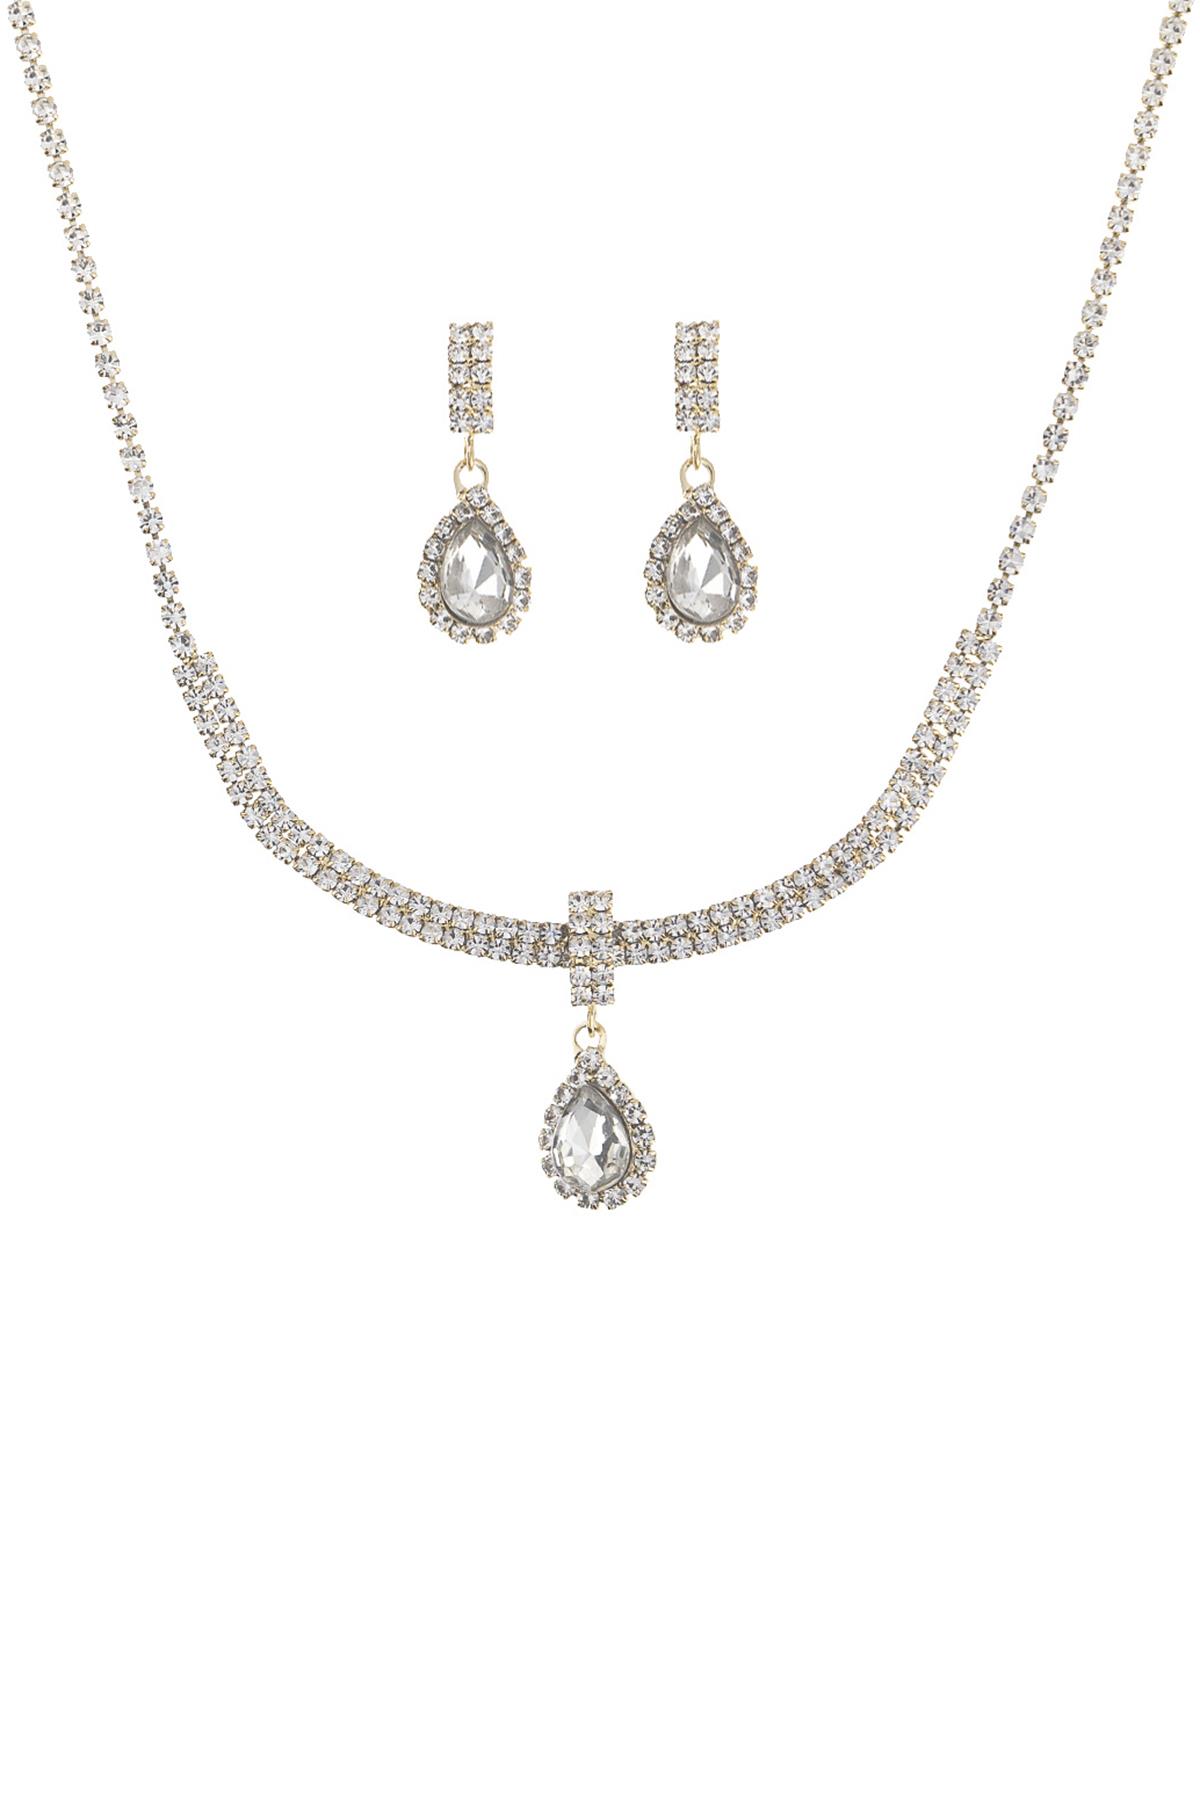 RHINESTONE TEAR DROP NECKLACE AND EARRING SET